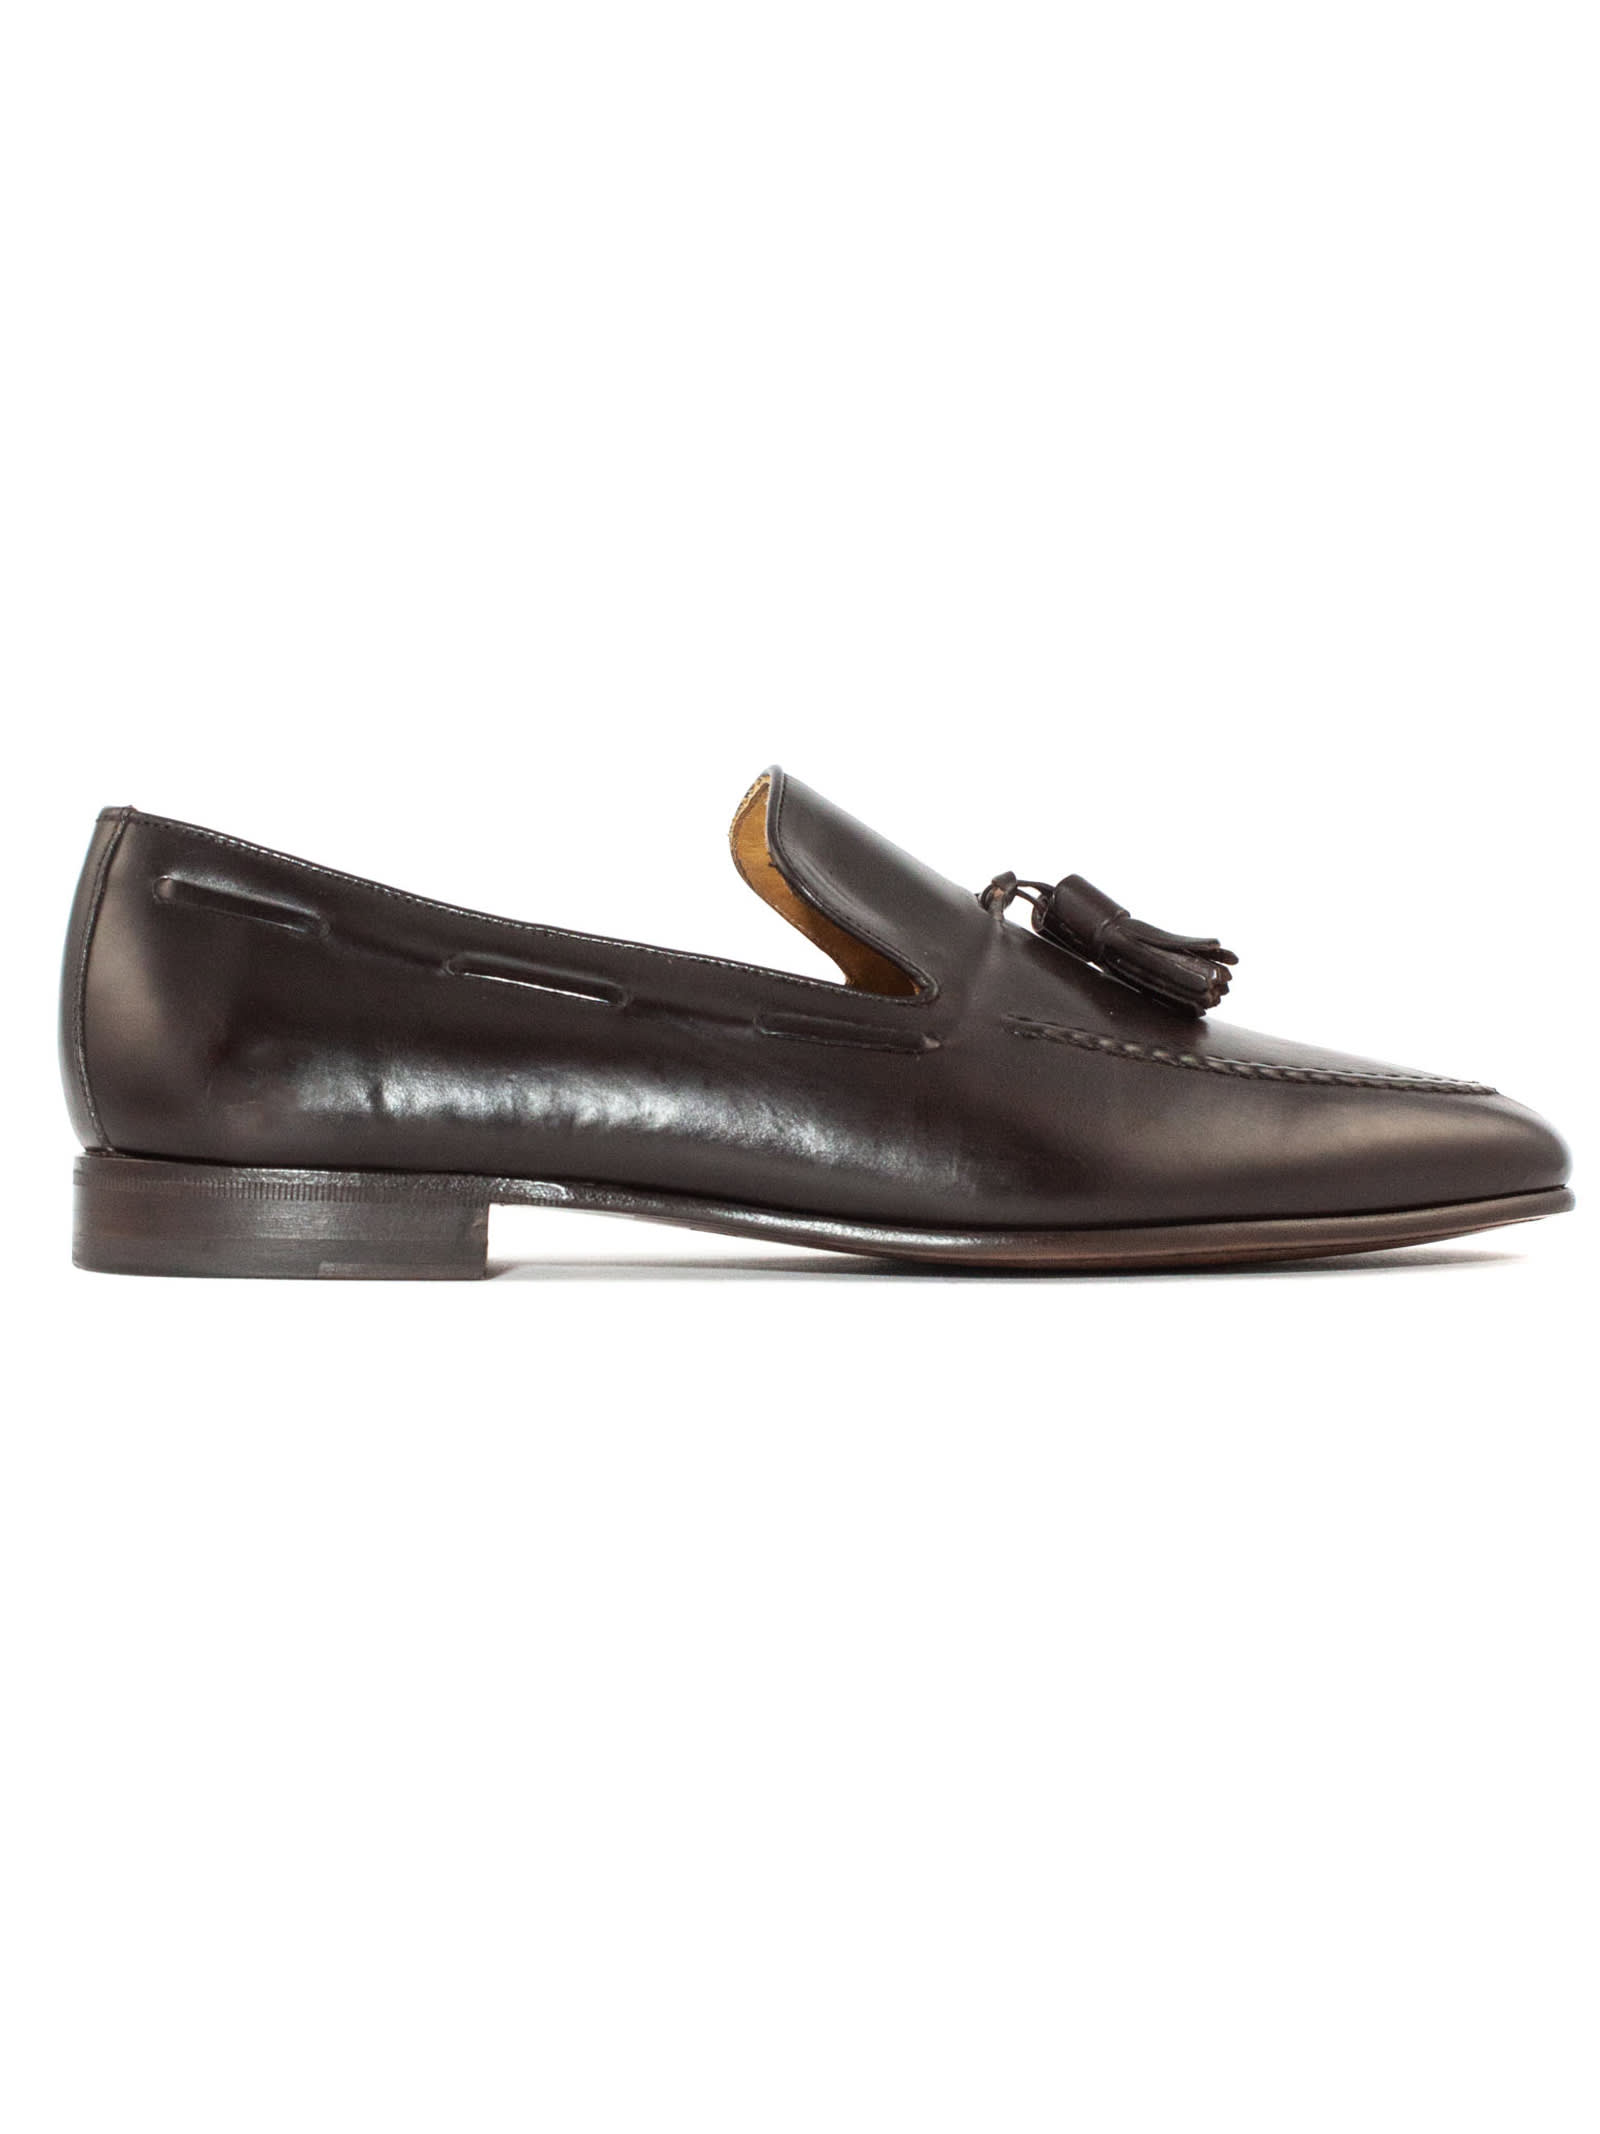 Berwick 1707 Brown Calf Leather Loafers